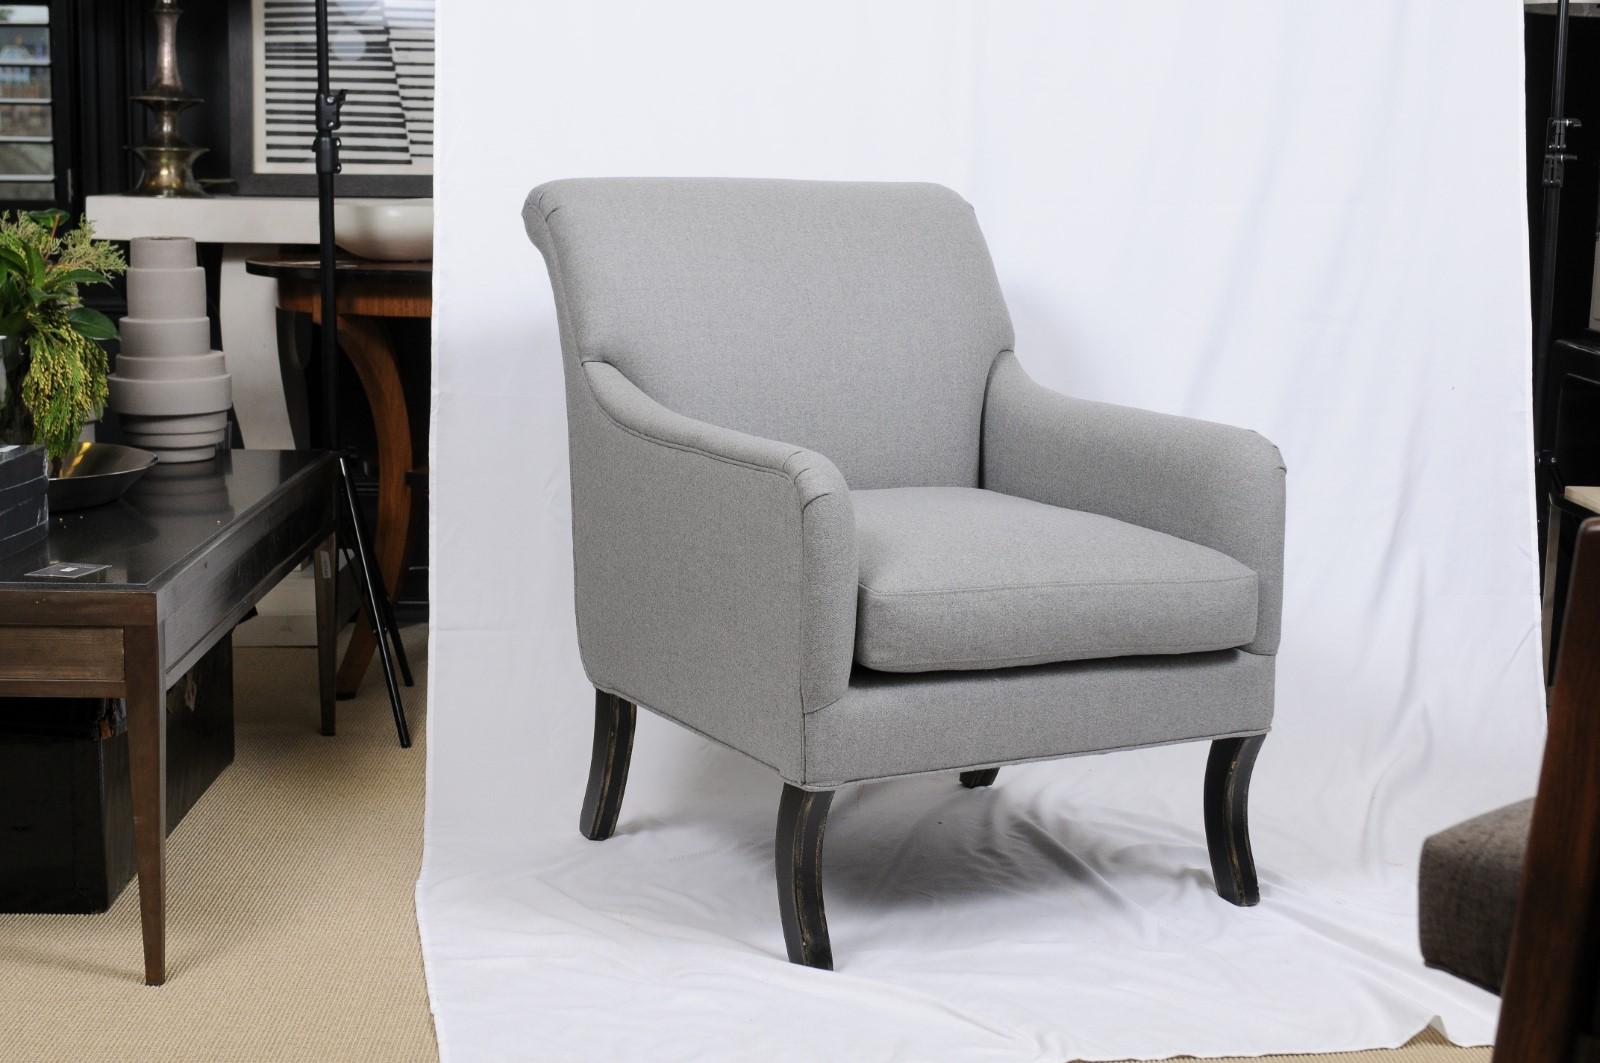 Upholstered armchairs by A. Rudin that feature a gracefully rolled crest rail that echoes the line of the English rolled arms. Cabriole front legs add further movement to the chairs. They are upholstered in a light gray wool by Holland & Sherry. 2